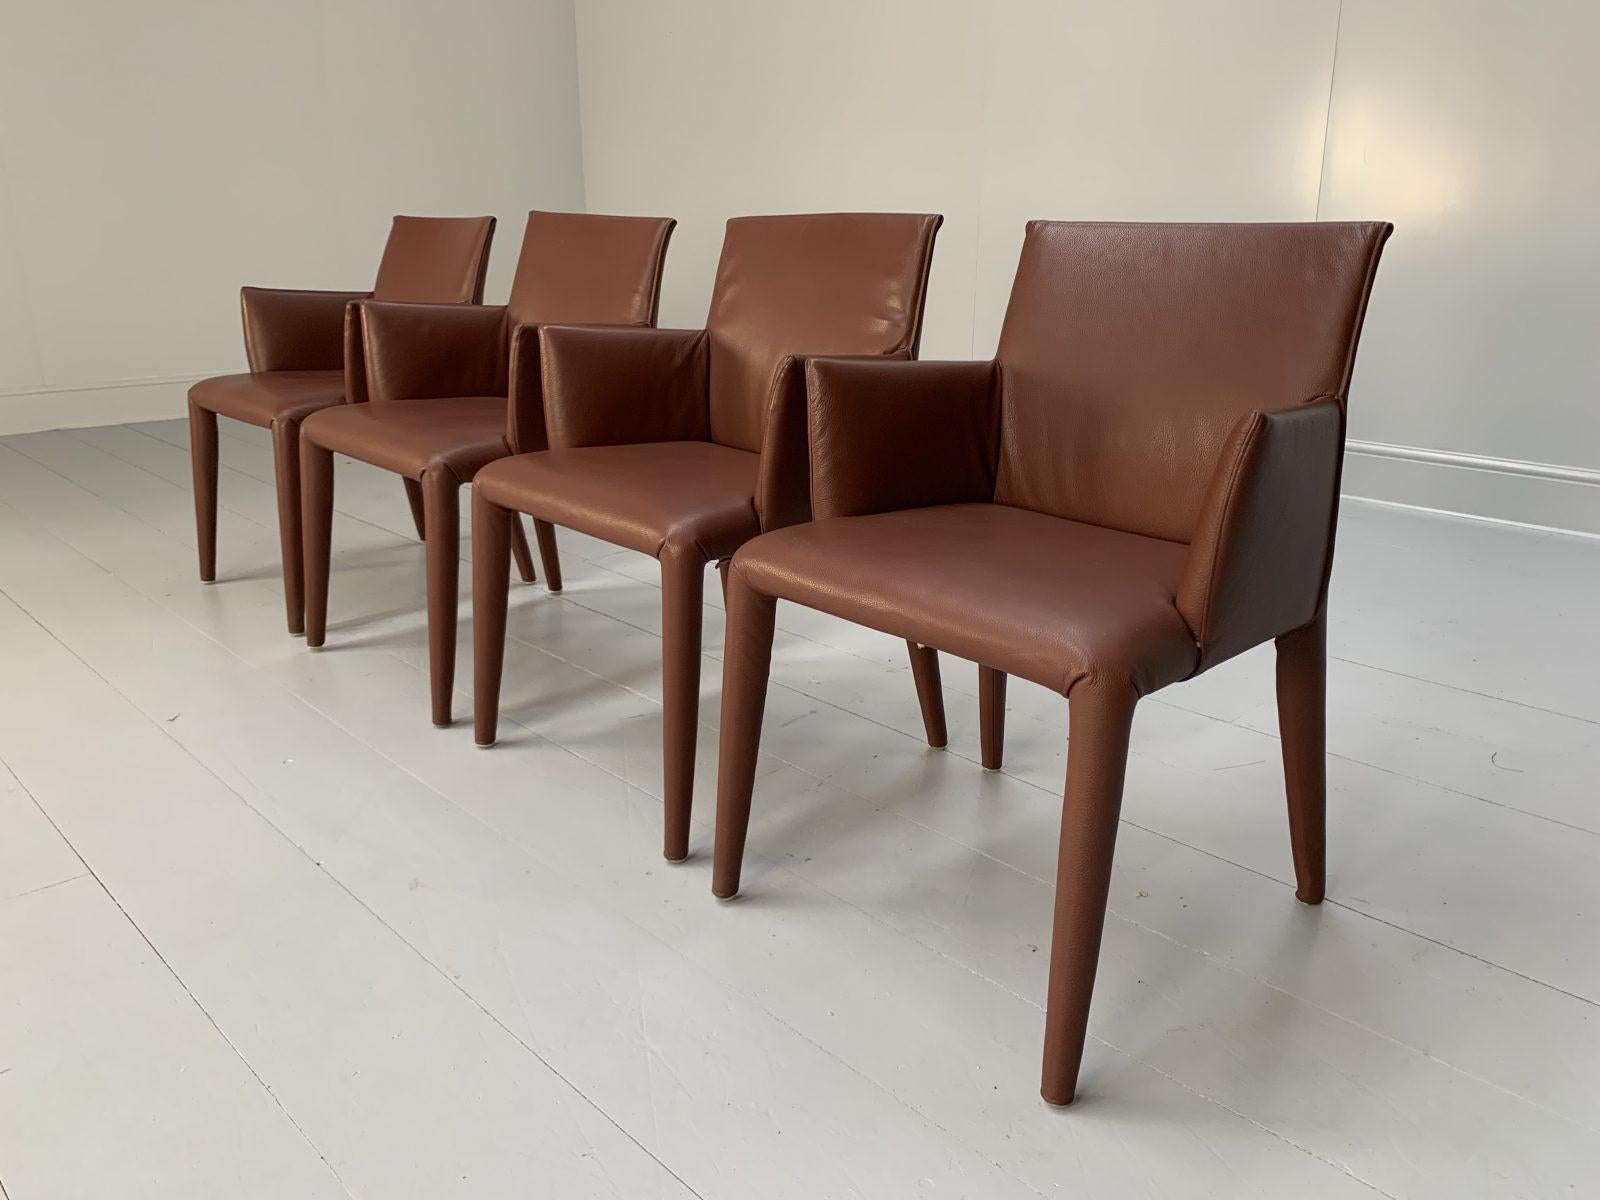 This is one of the most handsome, refined suites of chairs you could hope to find.

This is an ultra-rare opportunity to acquire what is, unequivocally, the best of the best, it being a most spectacular, immaculate, beautifully-presented 4-piece